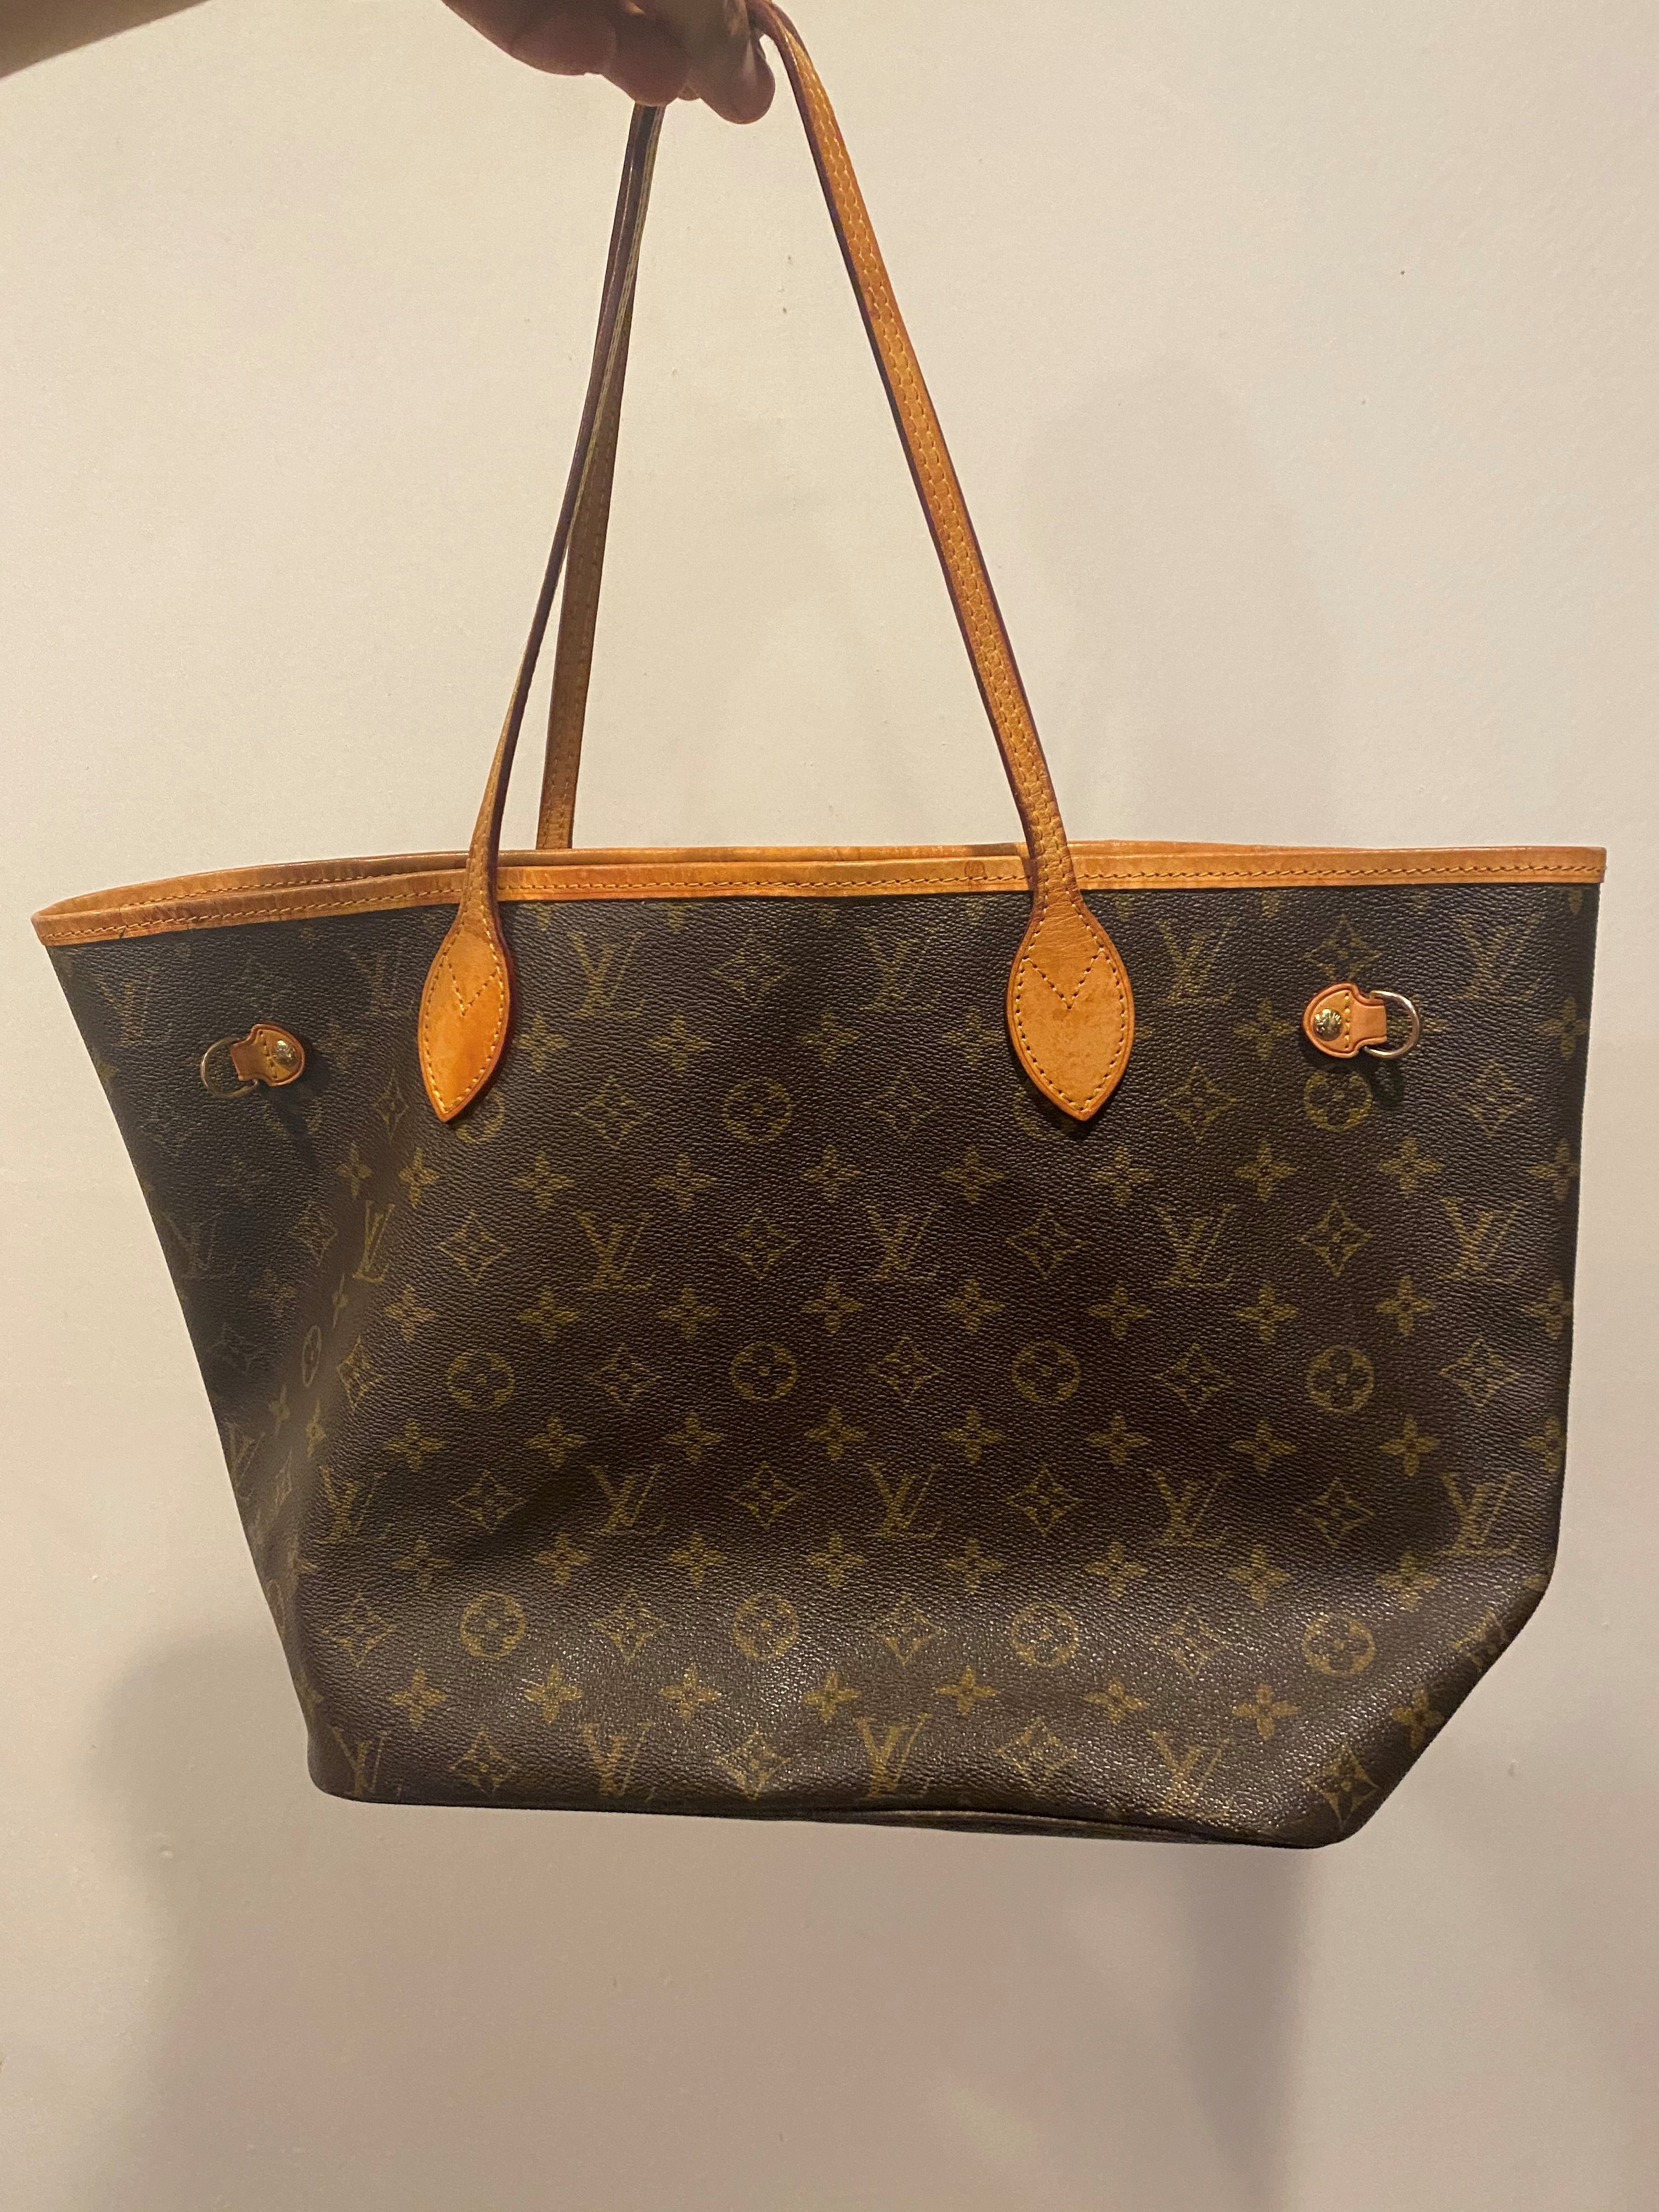 Fake Louis Vuitton Neverfull vs Real: Important Details You Should Definitely Pay Attention To (With Photo Examples) fake neverfull monogram front view